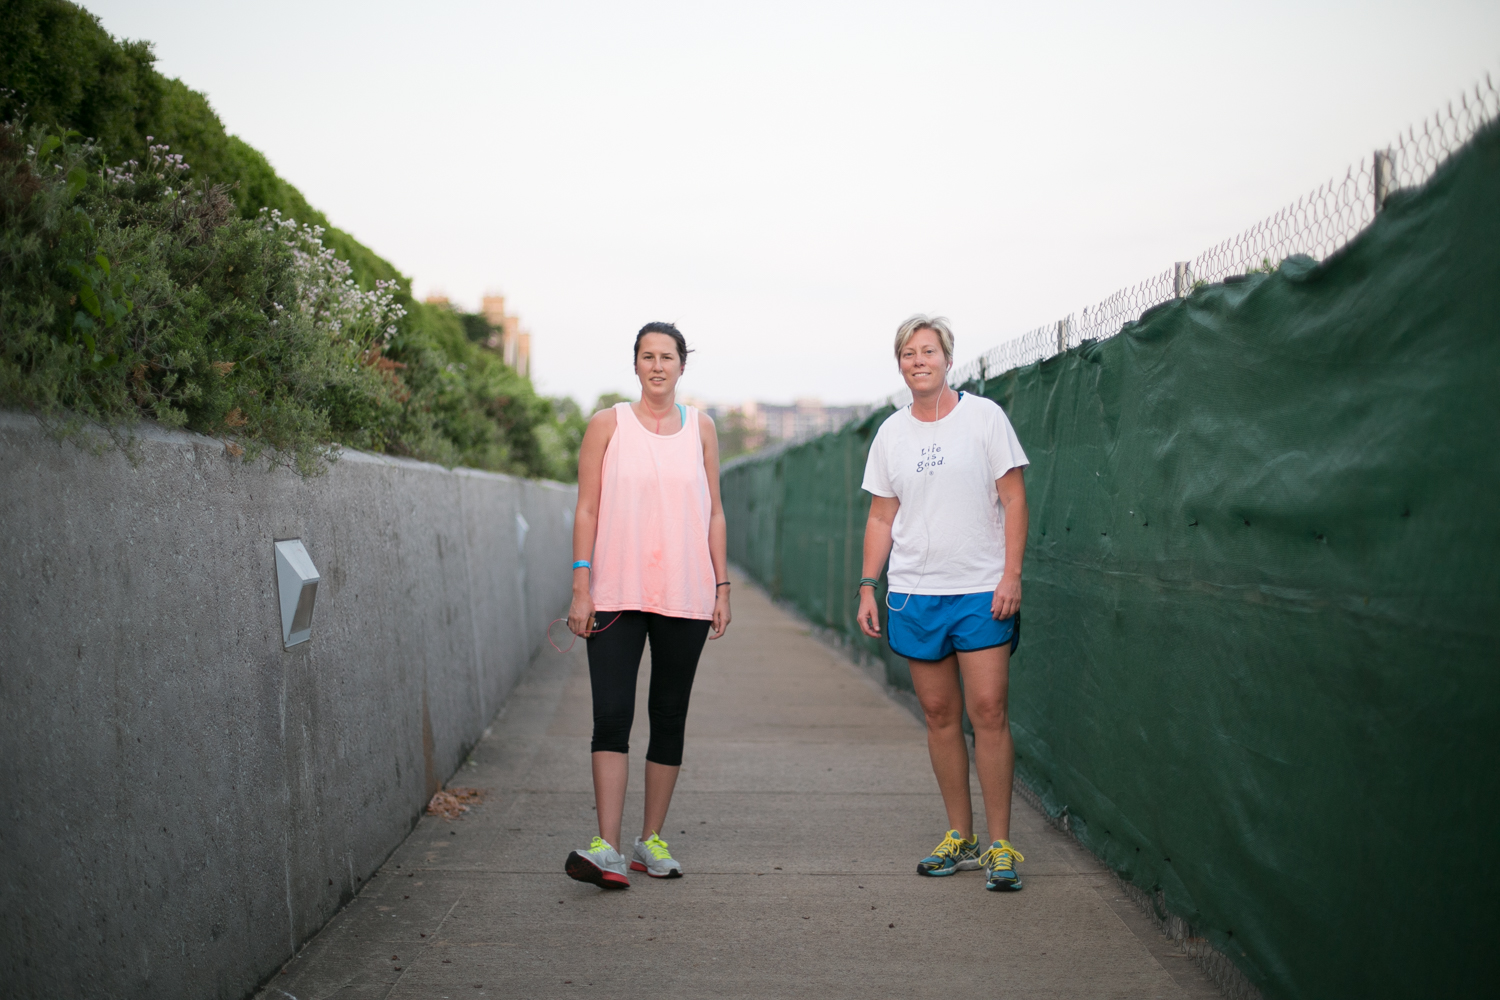   Heather and Julia usually run in the afternoons. But with the weather so nice, they've decided to switch it up. This morning, they're shooting for two miles.  